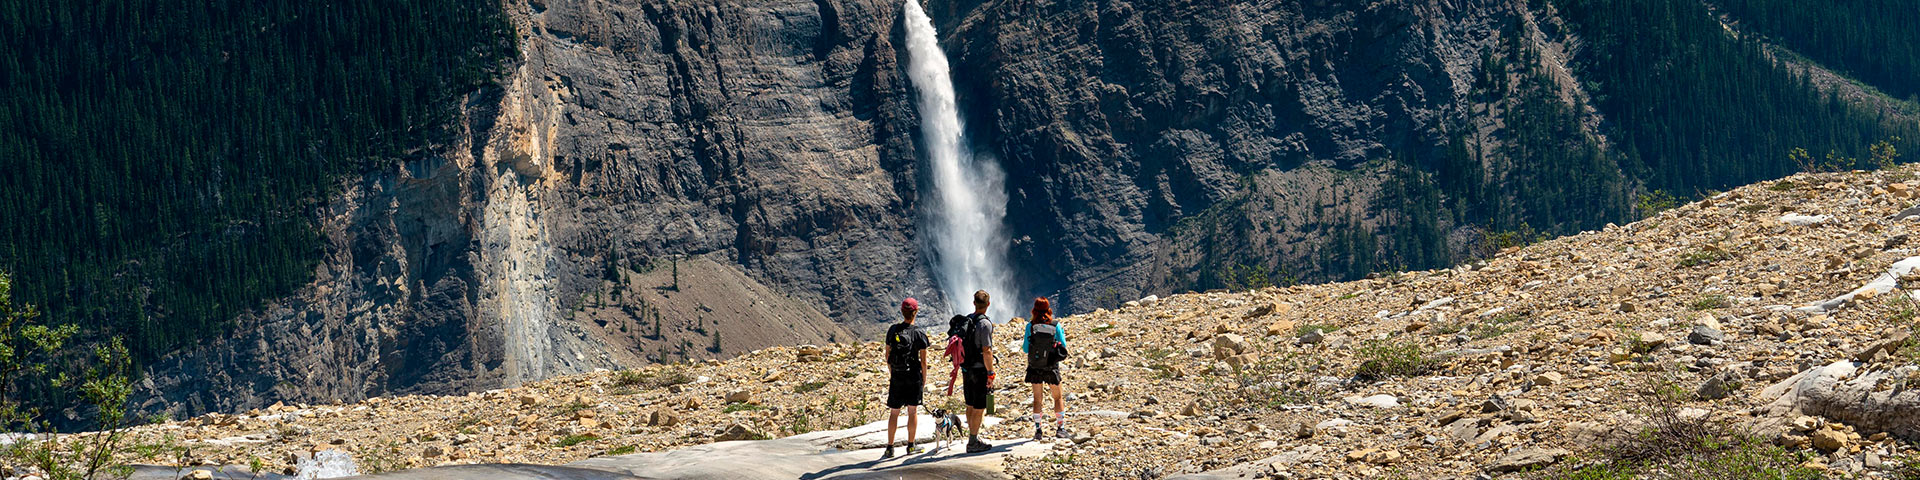 Hikers stand enjoying the view of a waterfall across the valley